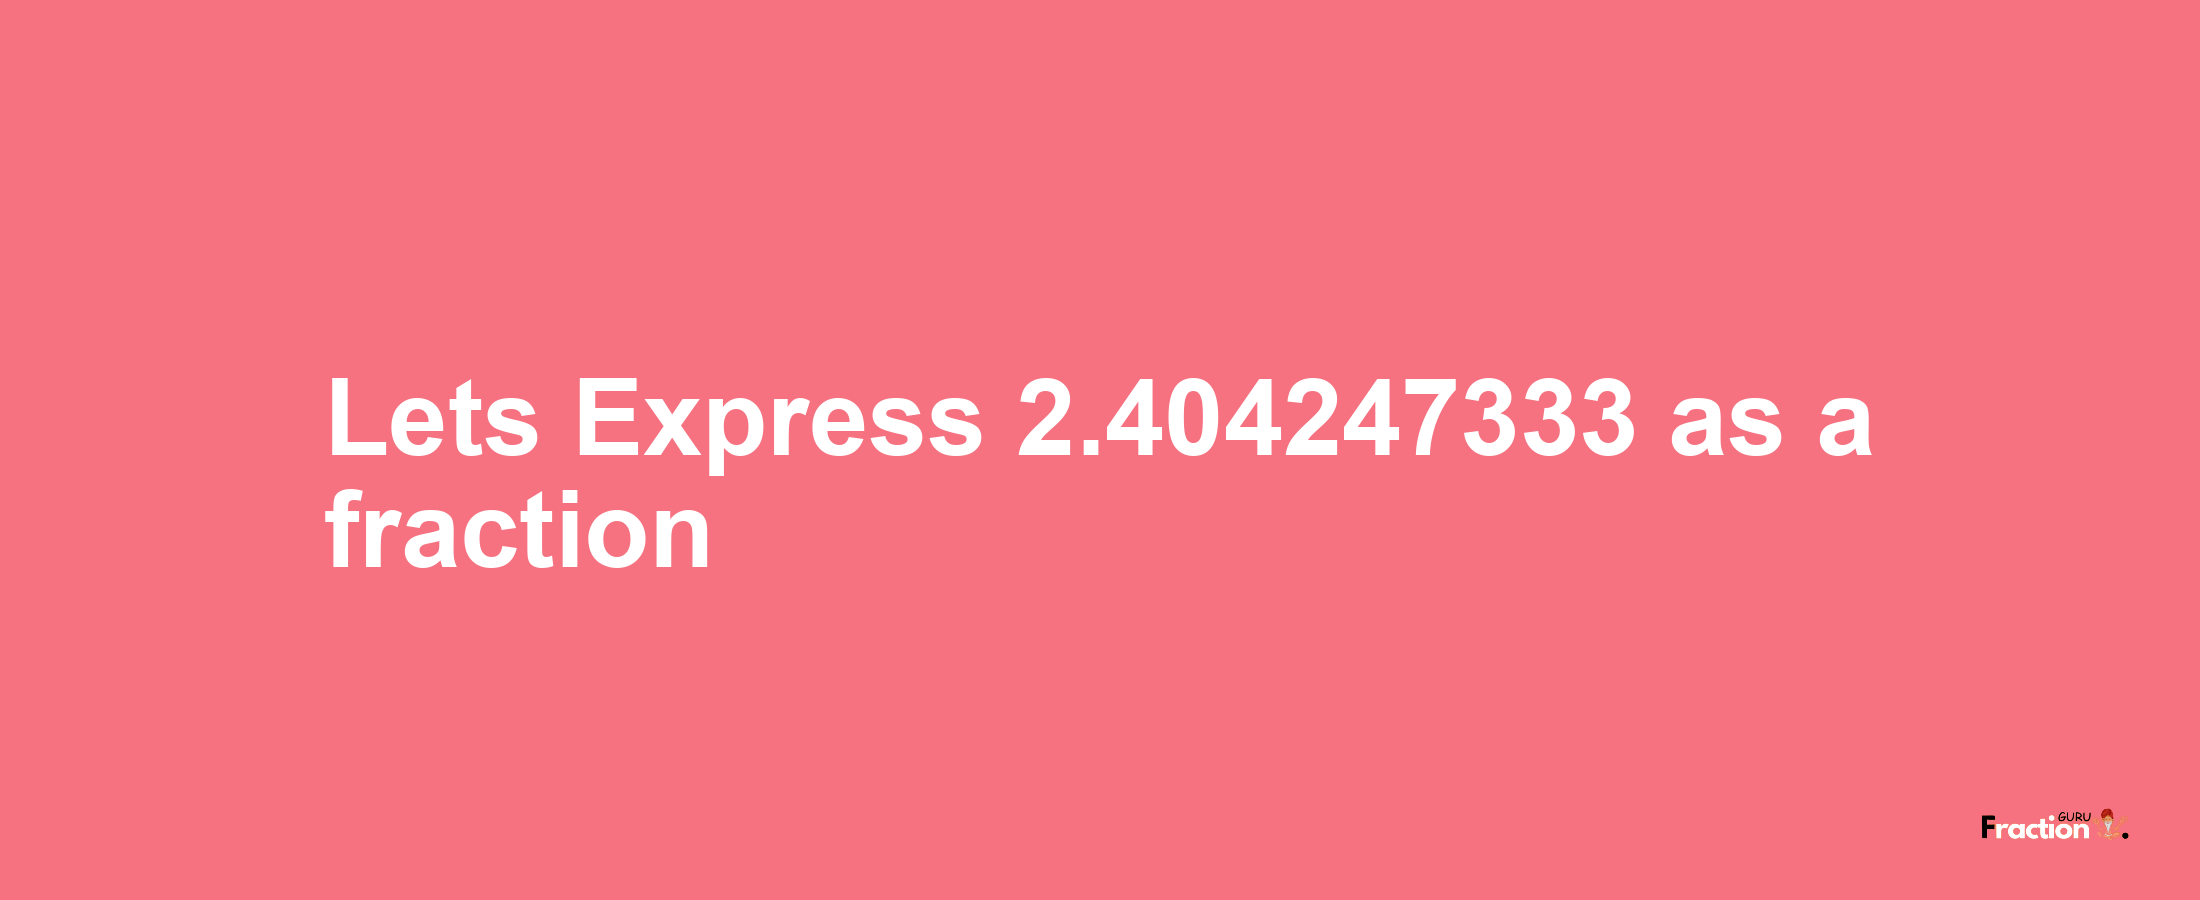 Lets Express 2.404247333 as afraction